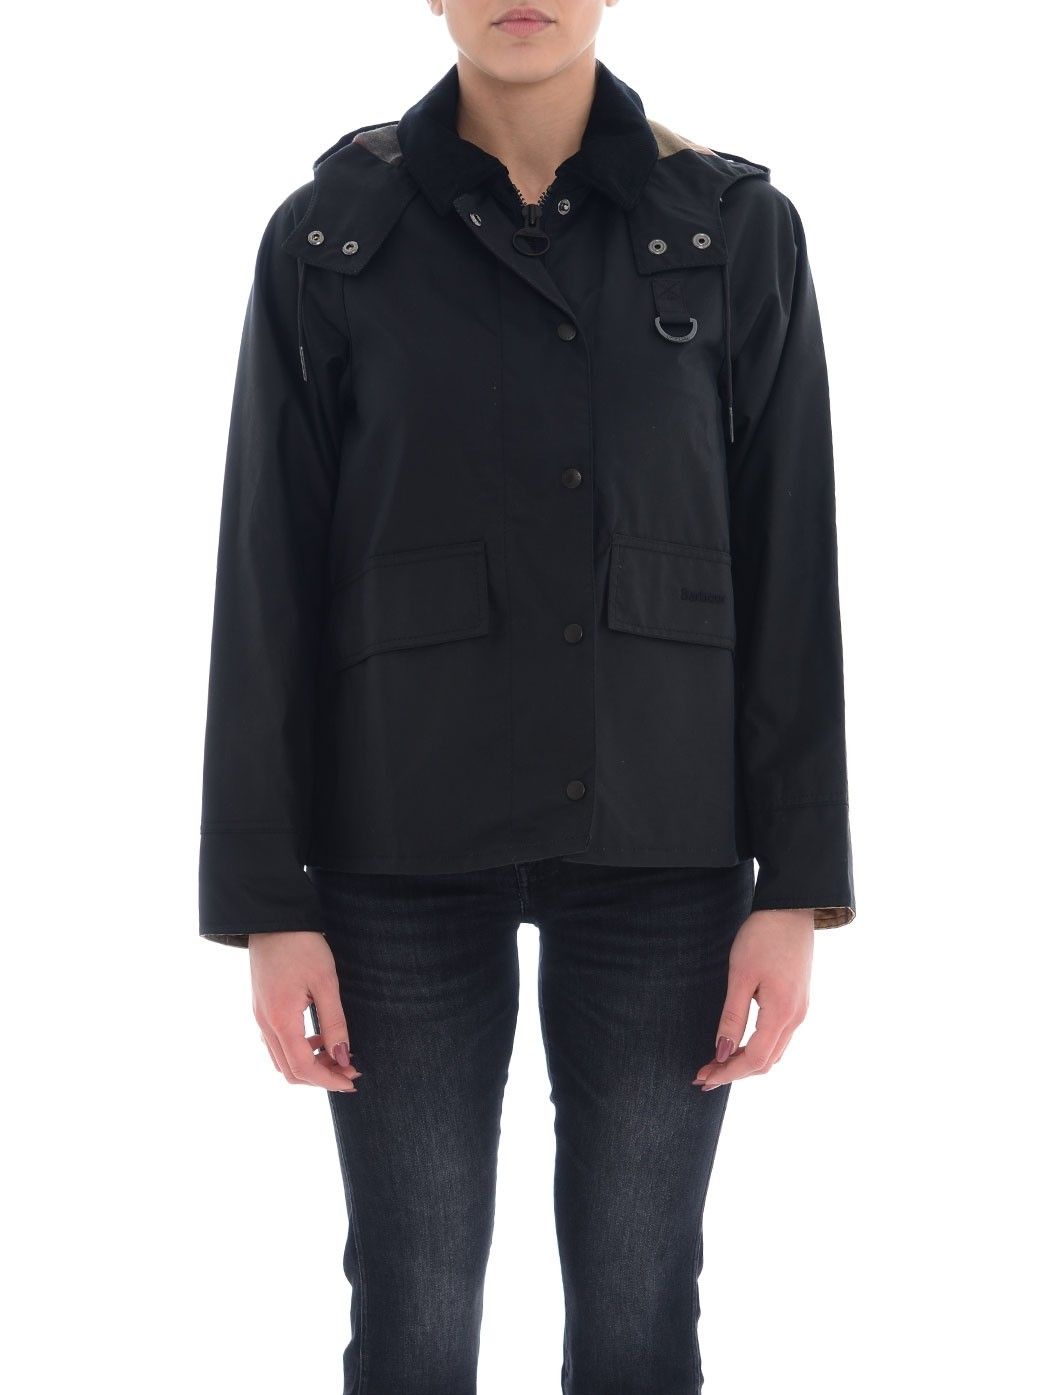  WOMENSWEAR,FALL WINTER COLLECTION  BARBOUR LWX1081